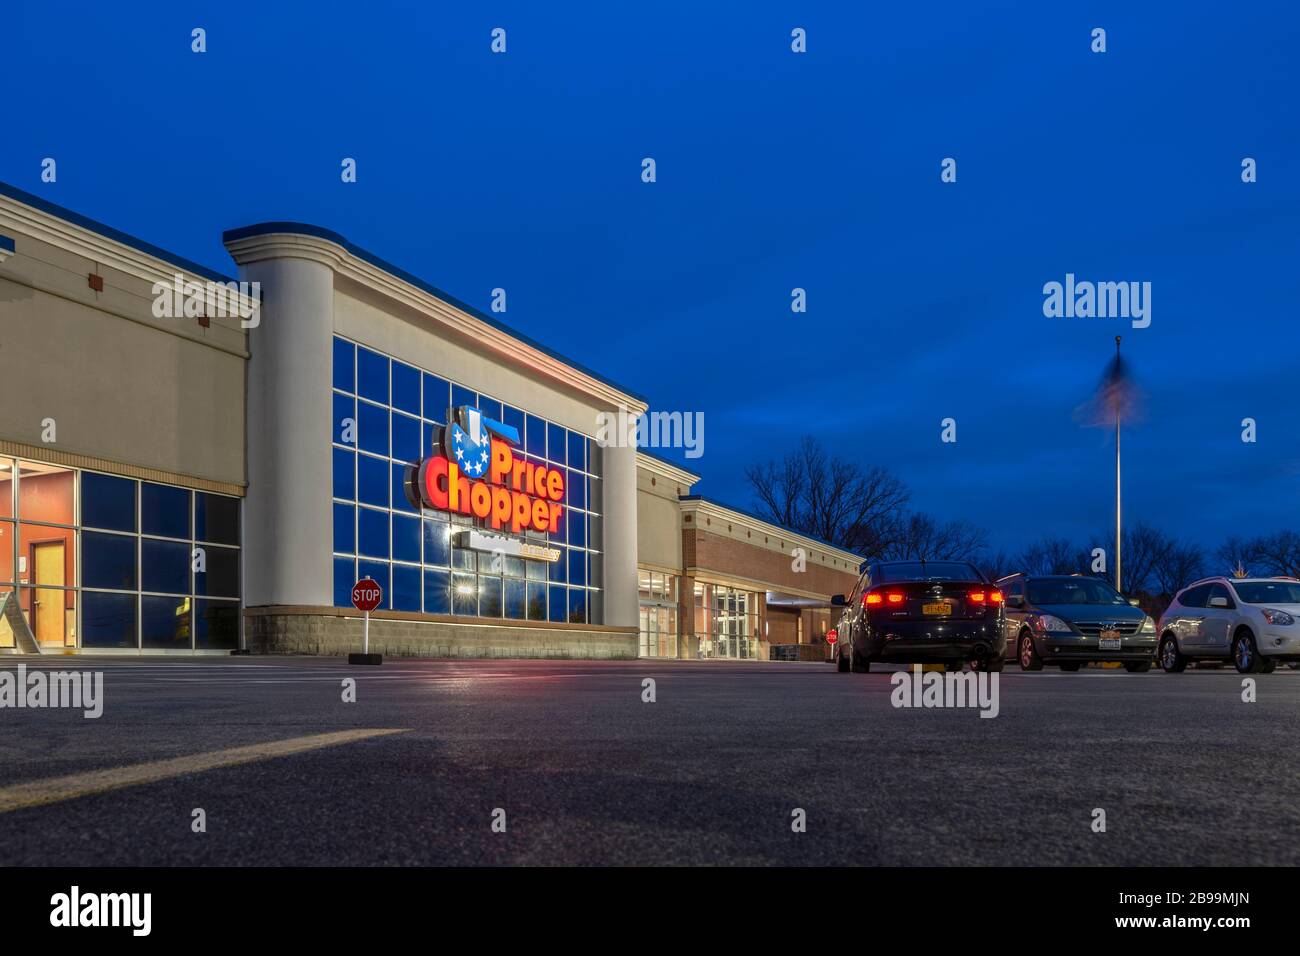 New Hartford, New York - Mar 19, 2020: Price Chopper is a Grocery Store Chain Owned by Golub Corporation, an American Supermarket Operator Owning the Stock Photo